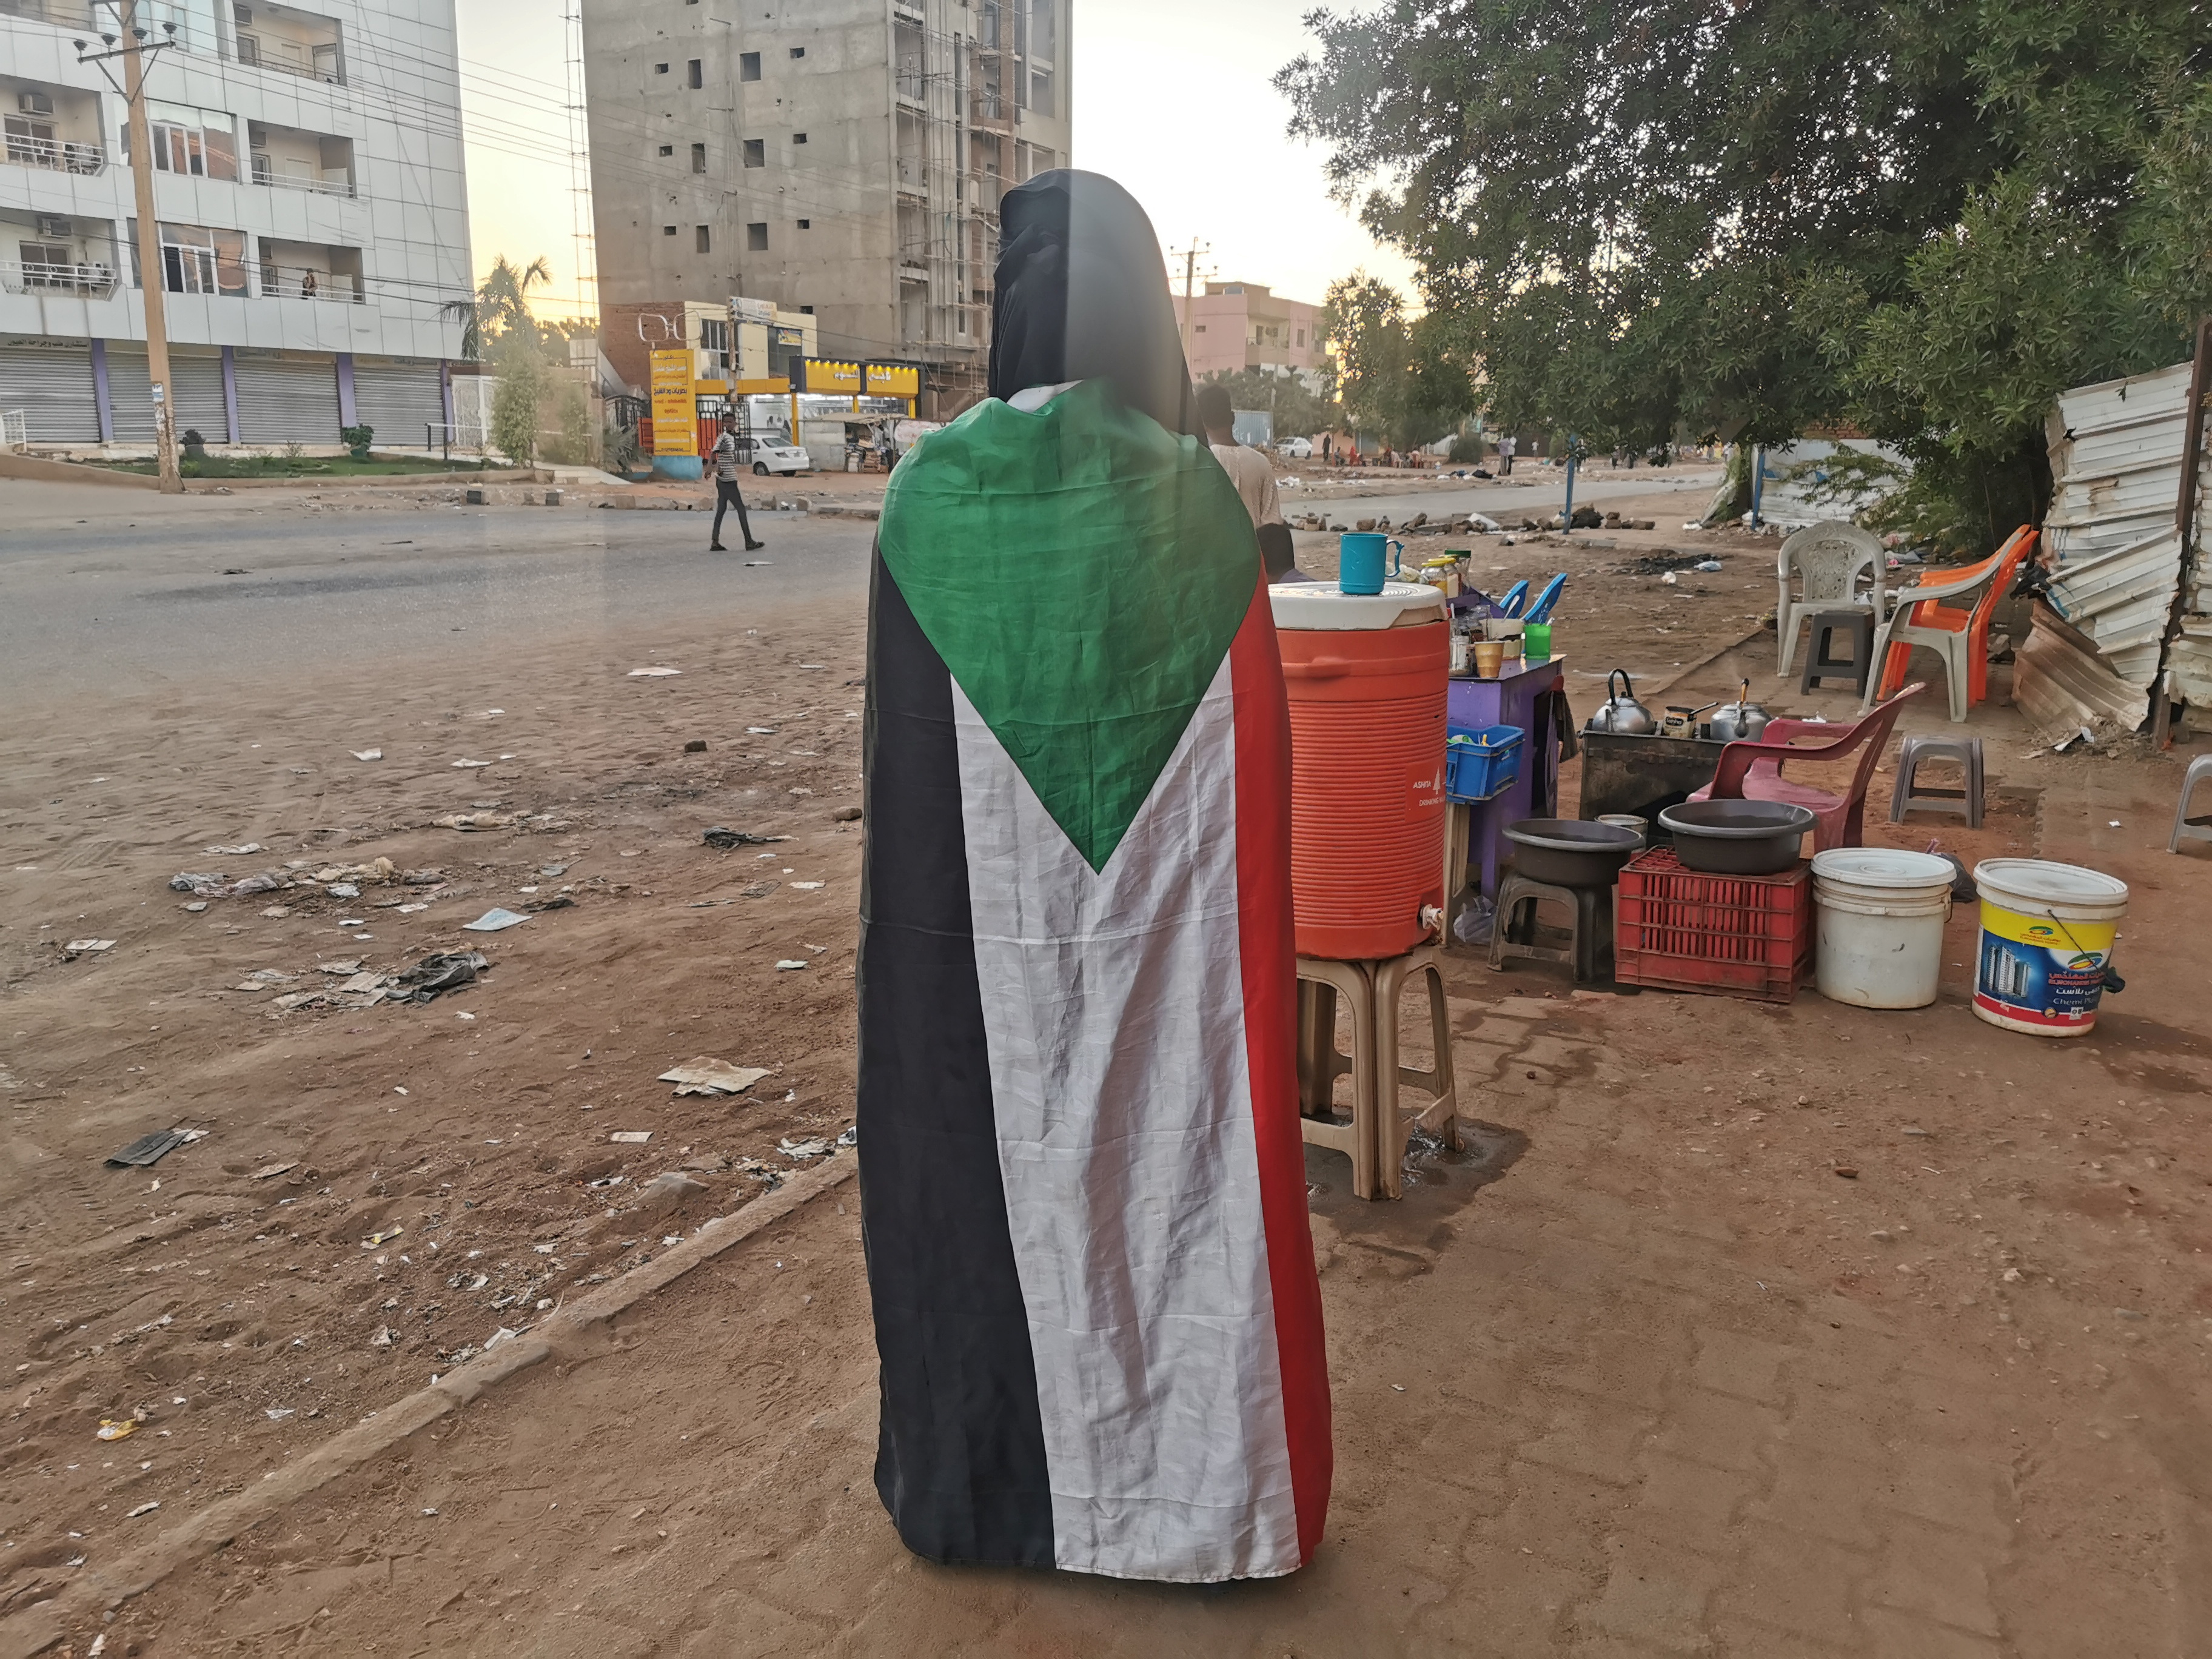 People take part in a protest in Khartoum